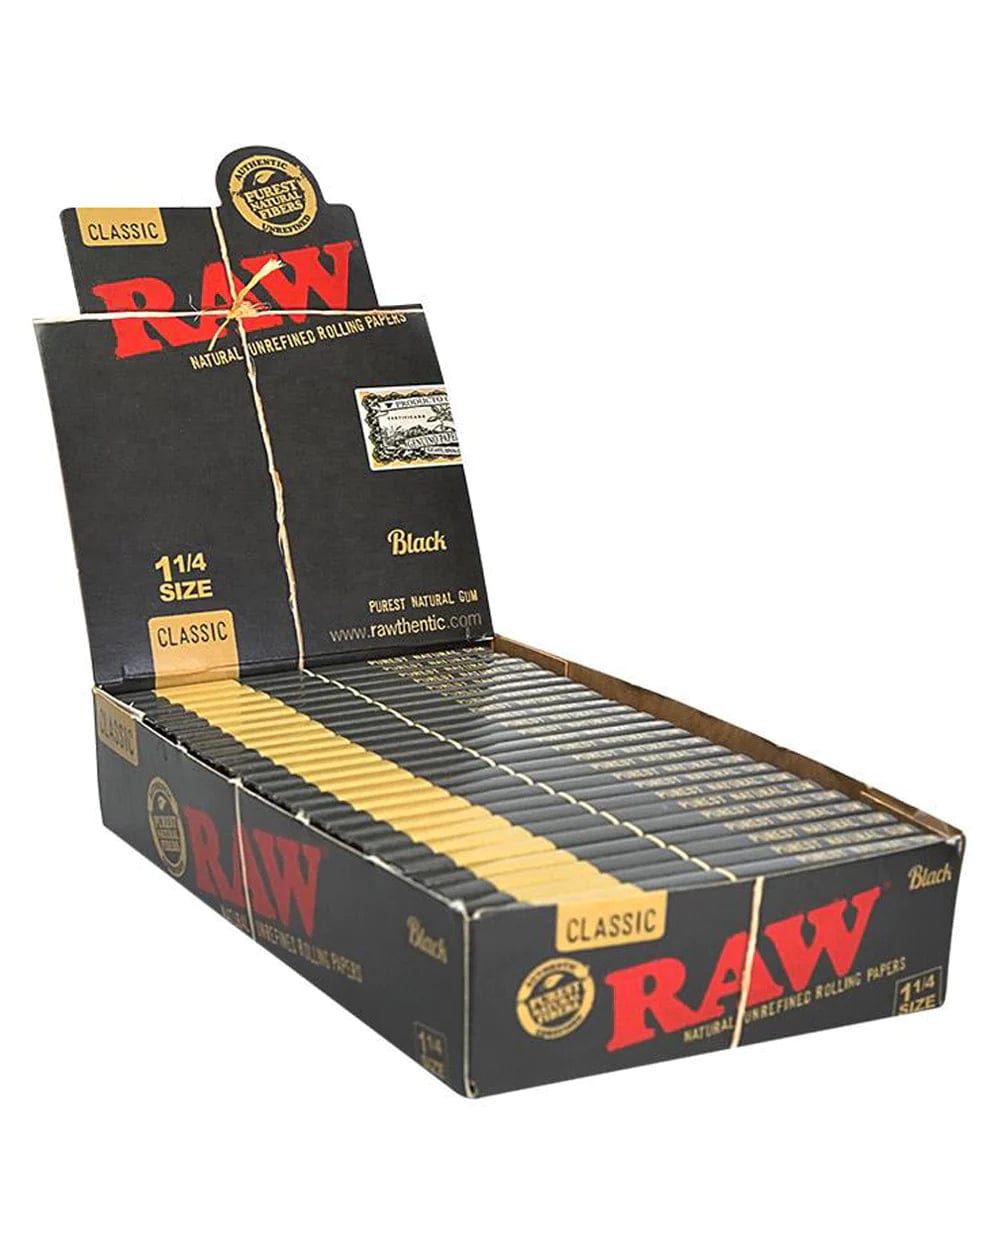 Las Vegas Scale Rolling Papers & Supplies